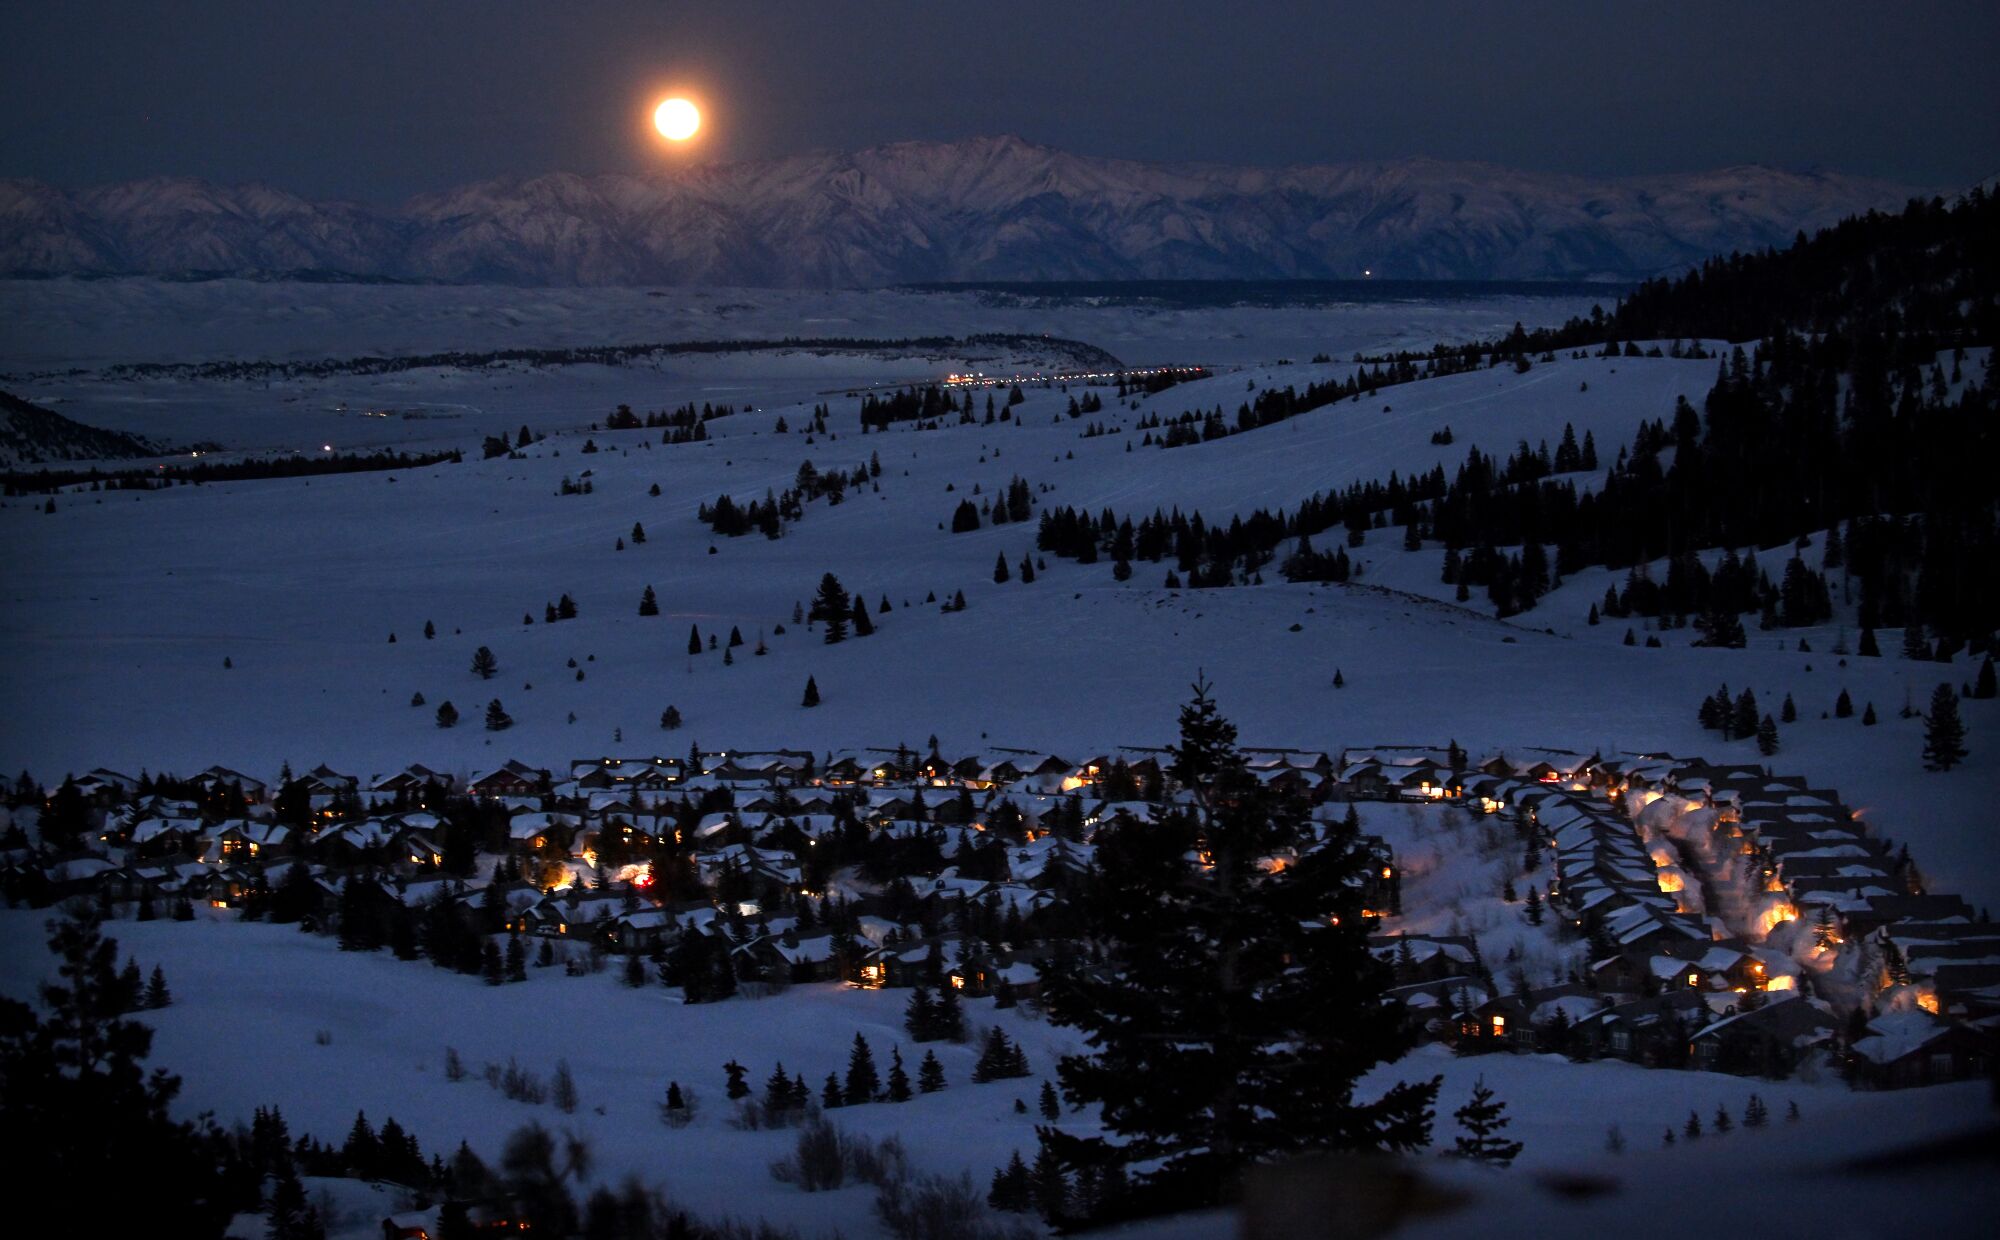 A full moon rises over a valley with a village at night, with mountains in the background